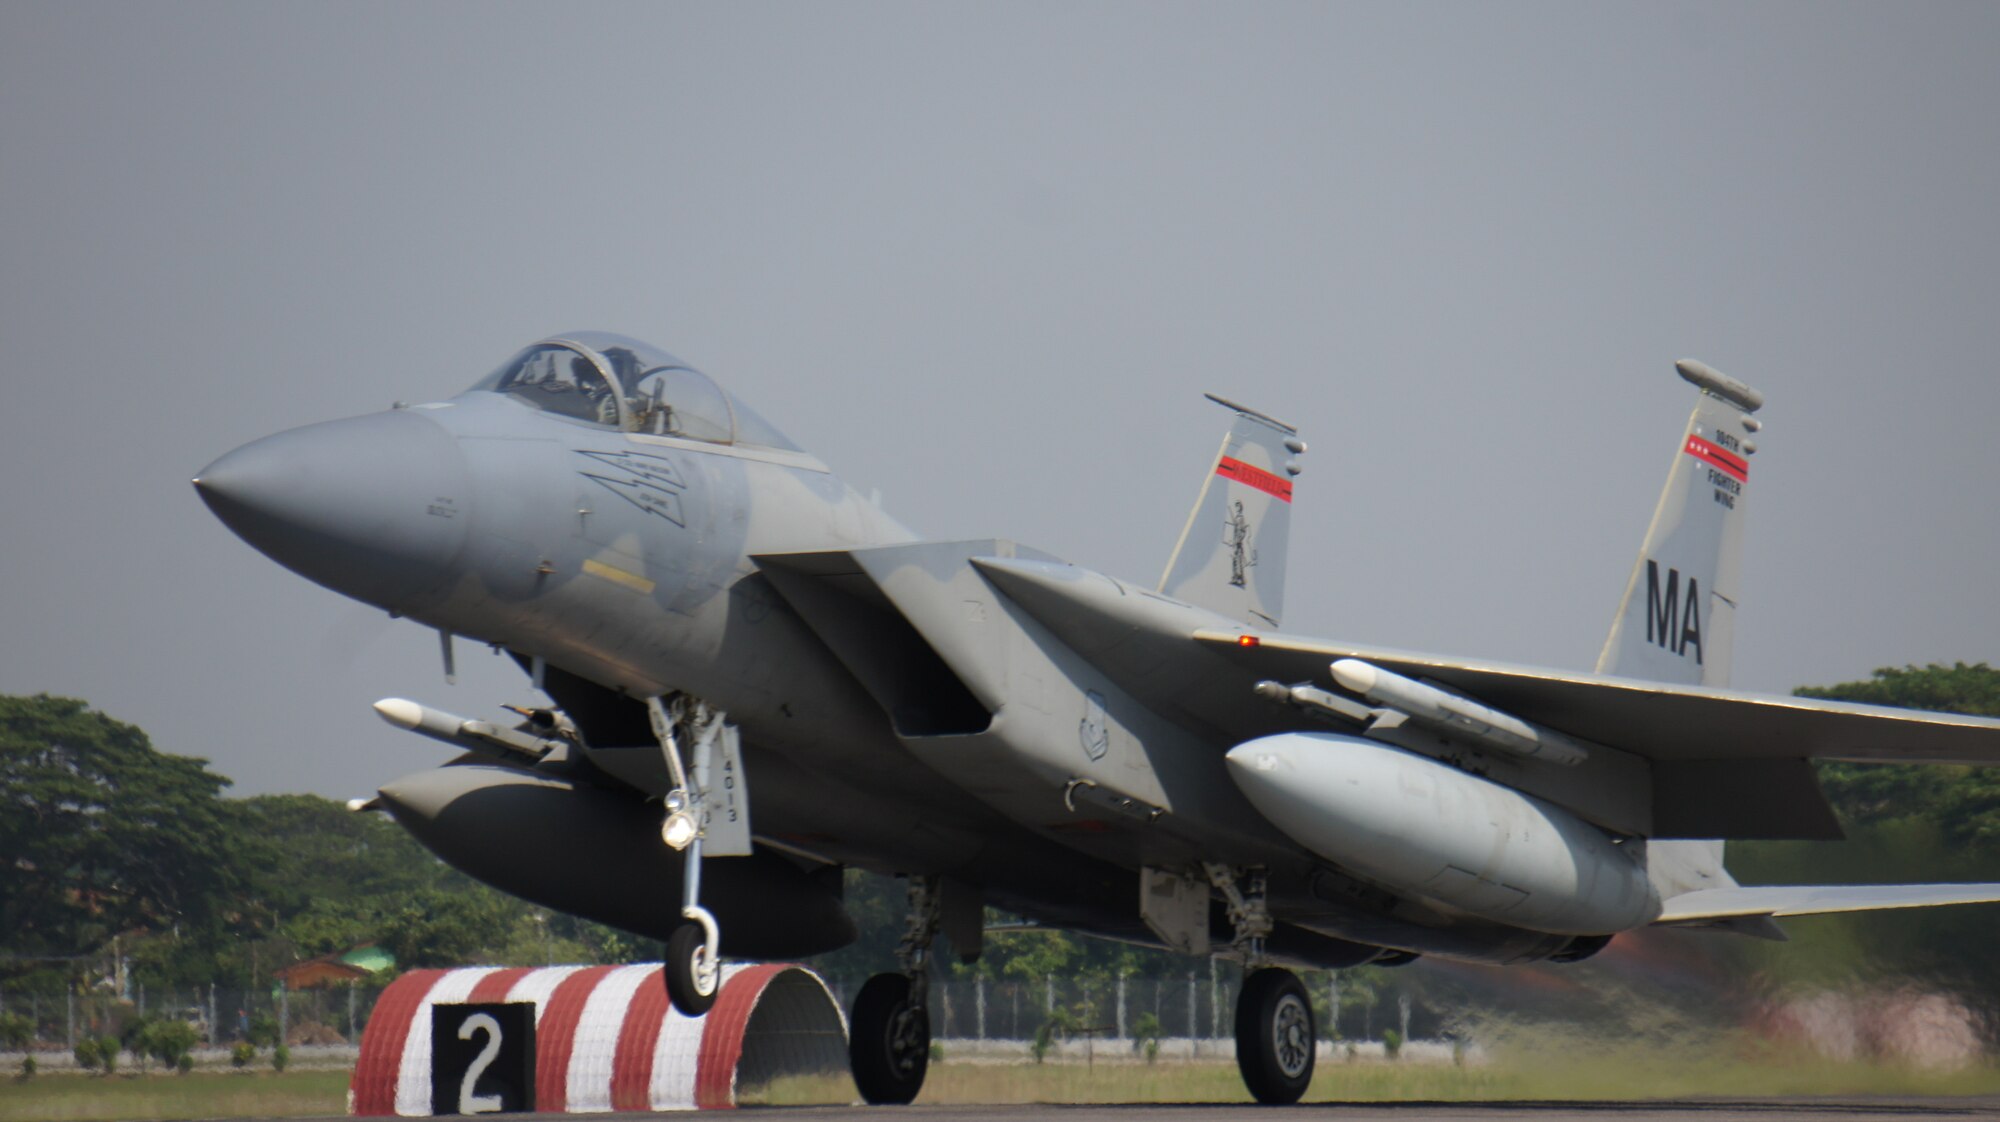 A Massachusetts National Guard F-15 Eagle from the 104th Fighter Wing takes off for the final sortie of Cope Taufan, P. U. Butterworth, Malaysia, June 19, 2014. Cope Taufan is a two week exercise that reinforces U.S. Pacific Command Theater Security Cooperation goals for the Southeast Asian region and demonstrates U.S. capability to project forces strategically in a combined, joint environment. More than 450 Airmen are participating, as well as four U.S. Air Force airframes. (U.S. Air Force Photo By Tech Sgt. Andrew L. Jackson / Unclassified, and Released.)